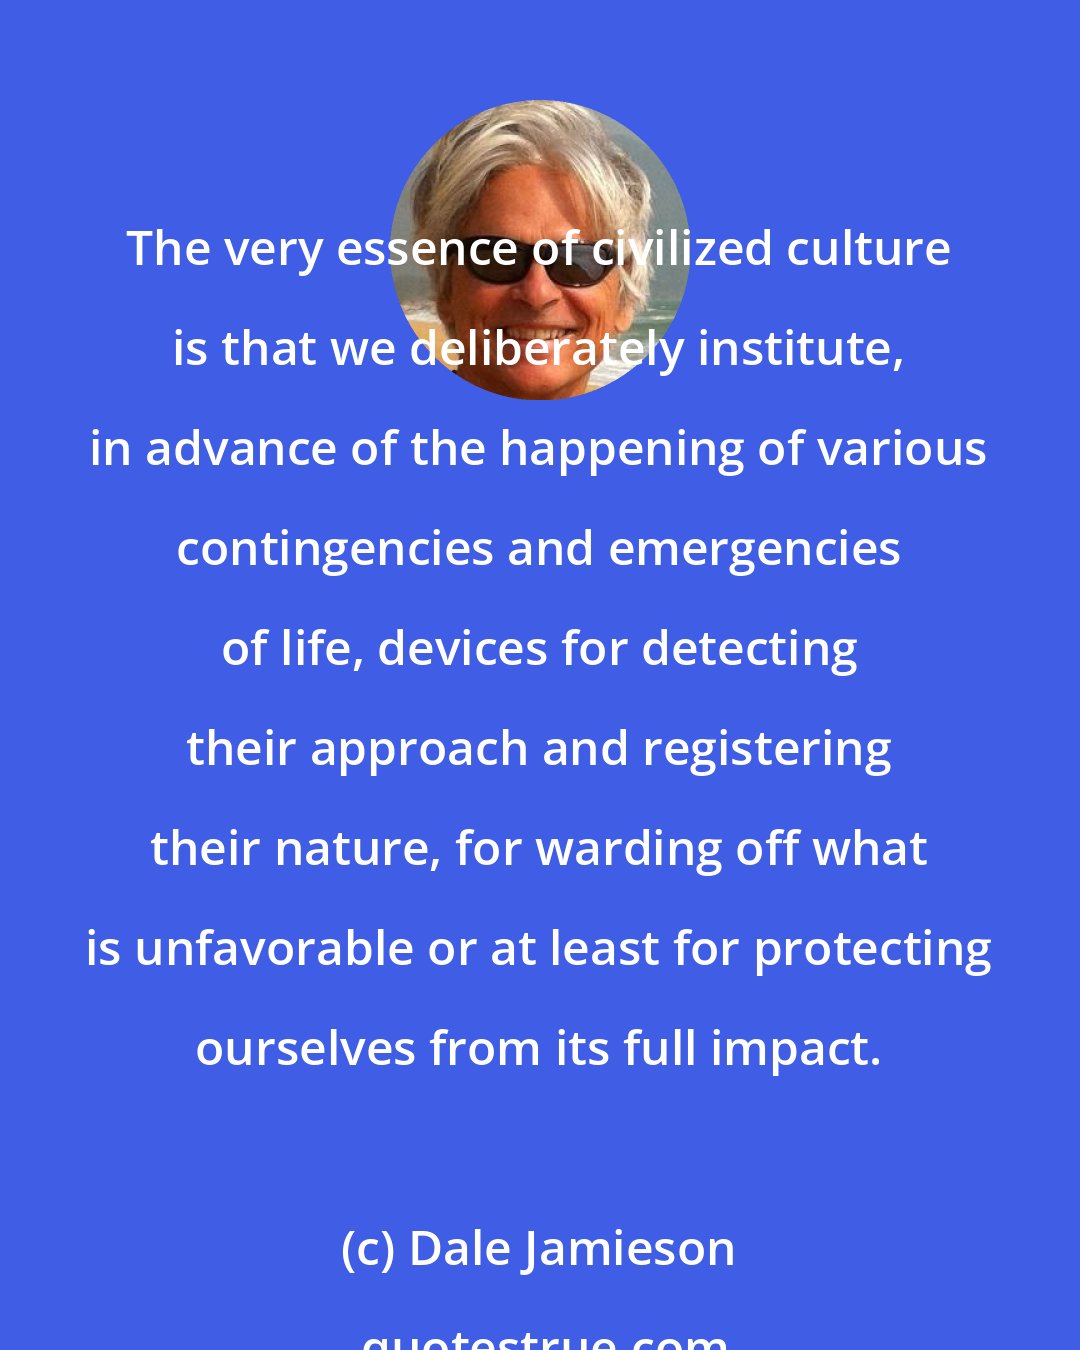 Dale Jamieson: The very essence of civilized culture is that we deliberately institute, in advance of the happening of various contingencies and emergencies of life, devices for detecting their approach and registering their nature, for warding off what is unfavorable or at least for protecting ourselves from its full impact.